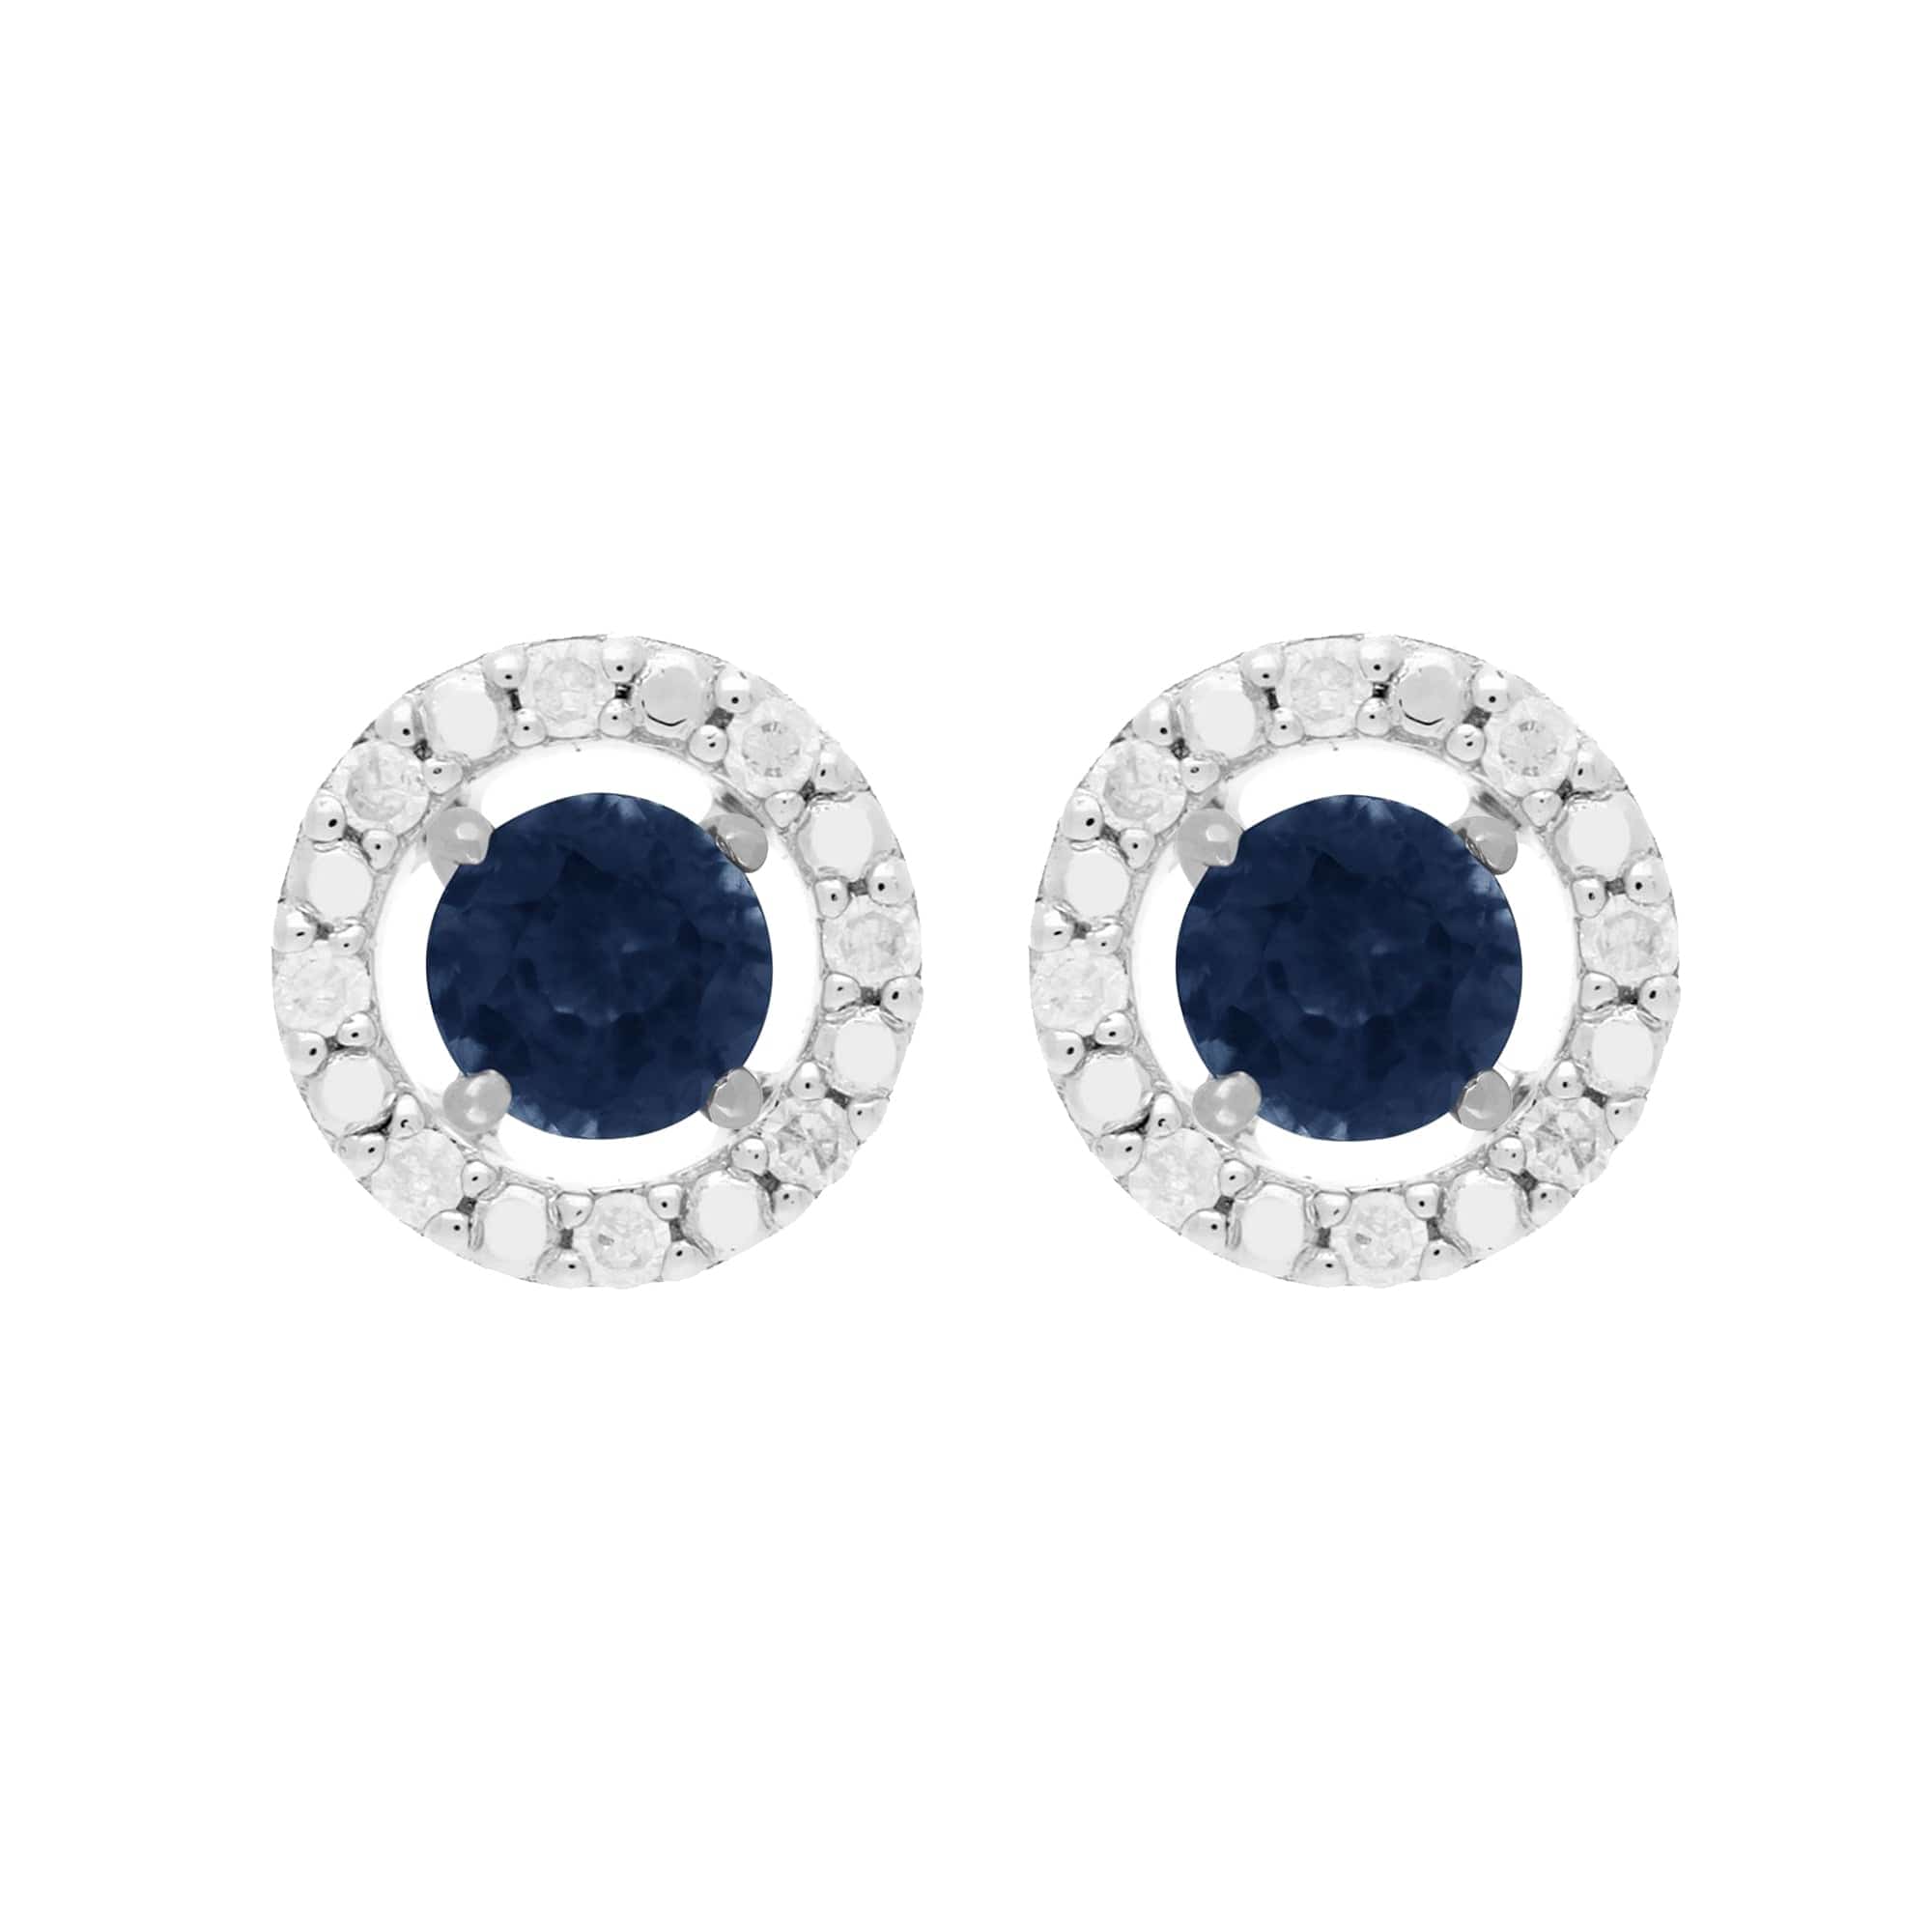 117E0031169-162E0228019 Classic Round Blue Sapphire Stud Earrings and Detachable Diamond Round Jacket in 9ct White Gold 1